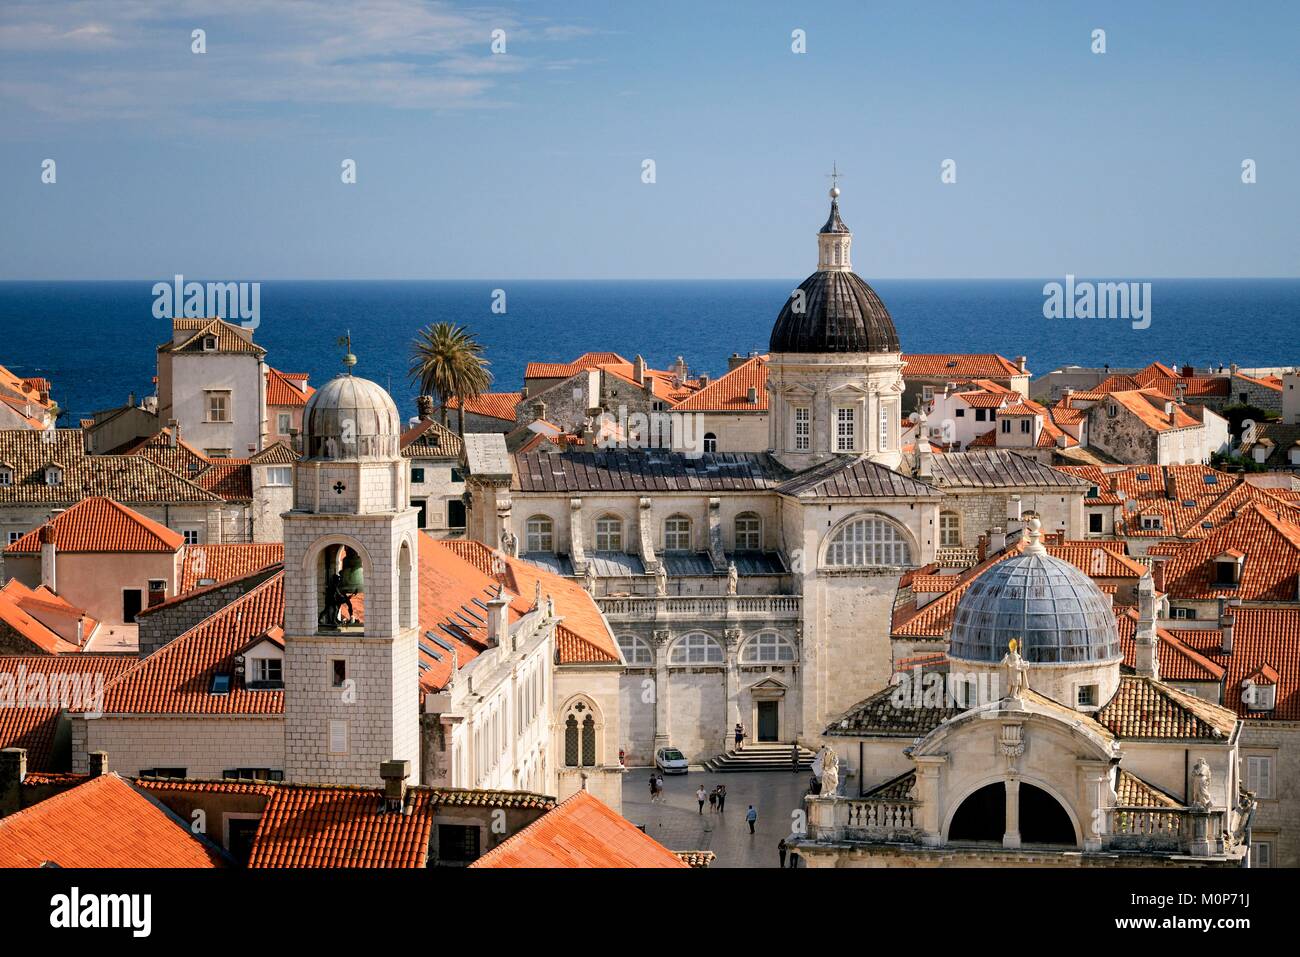 Croatia,Dalmatia,Dalmatian Coast,Dubrovnik,historical centre listed as World Heritage by UNESCO,city rooftops and the dome of the Assumption cathedral Stock Photo